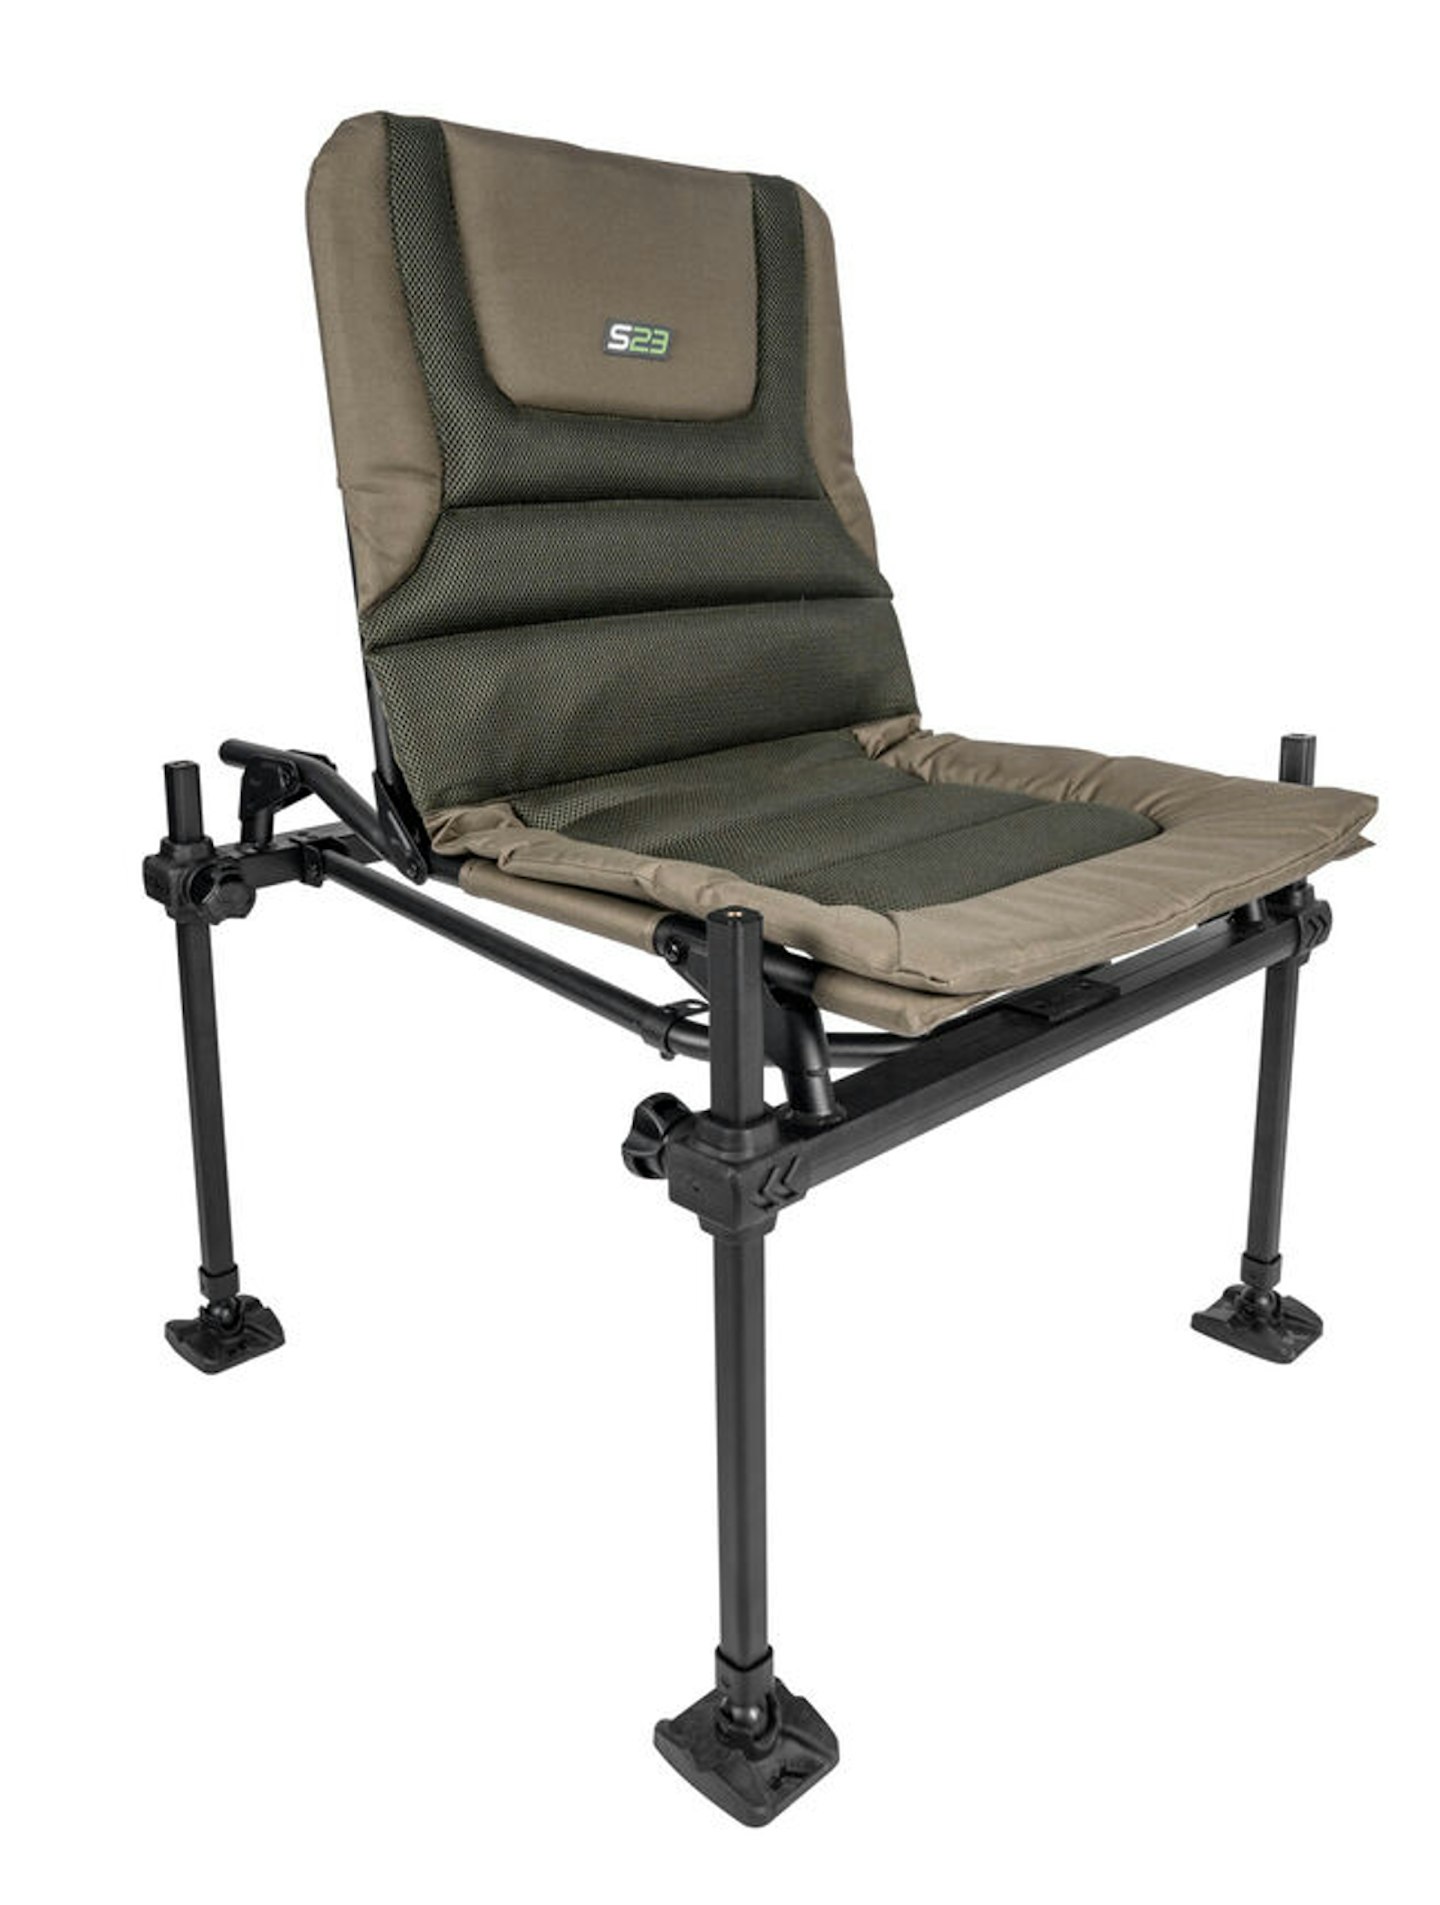 Korum S23 Accessory Chairs Review